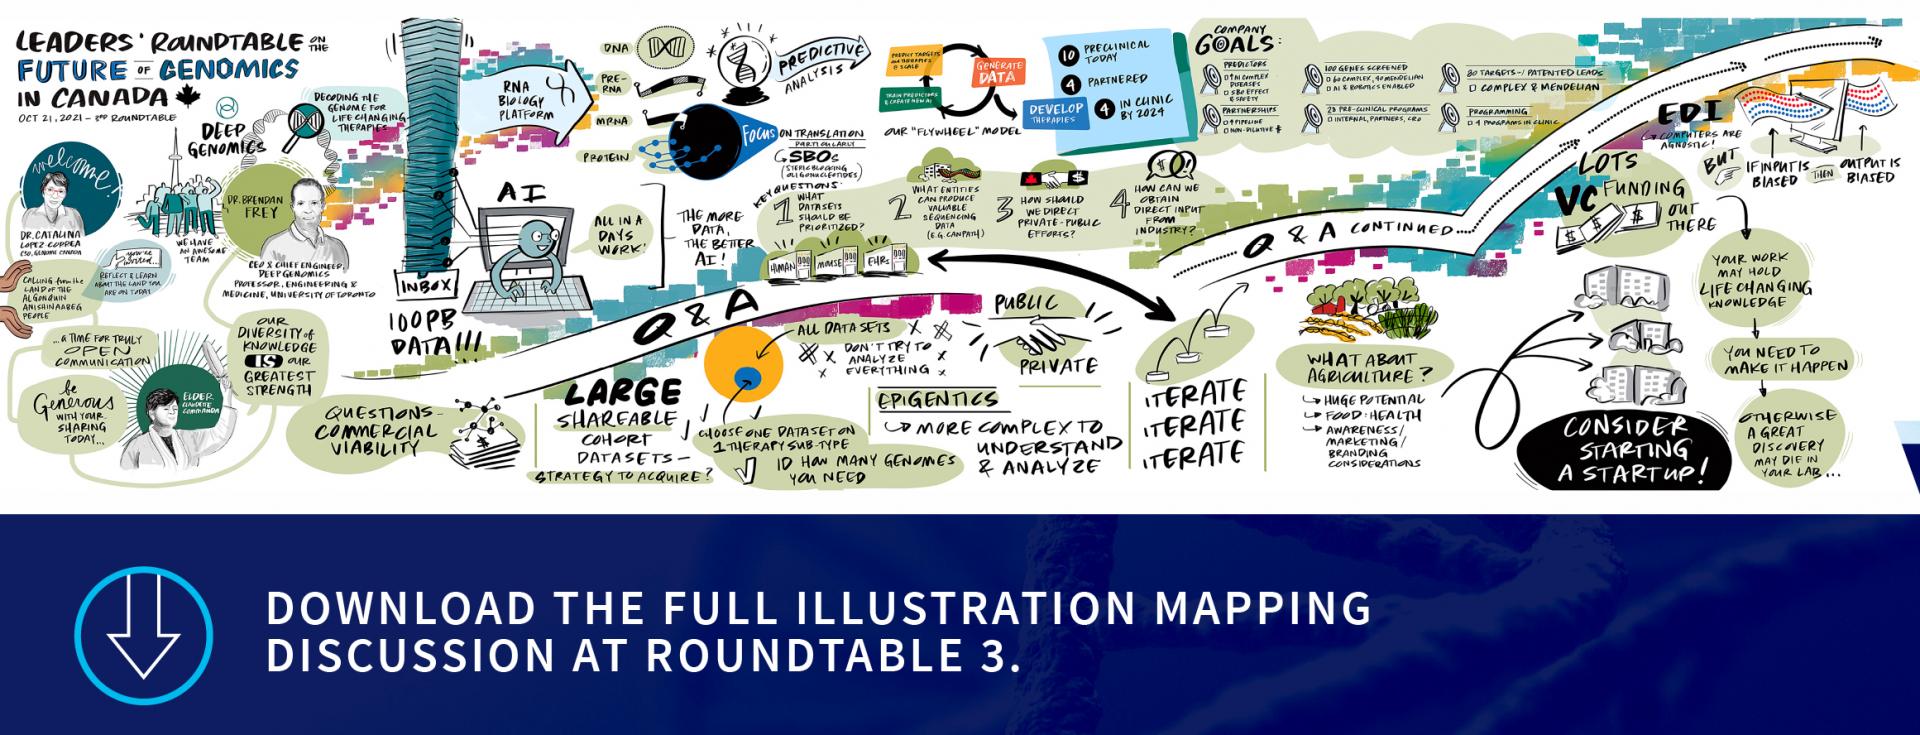 Download the full illustration mapping discussion at roundtable three.